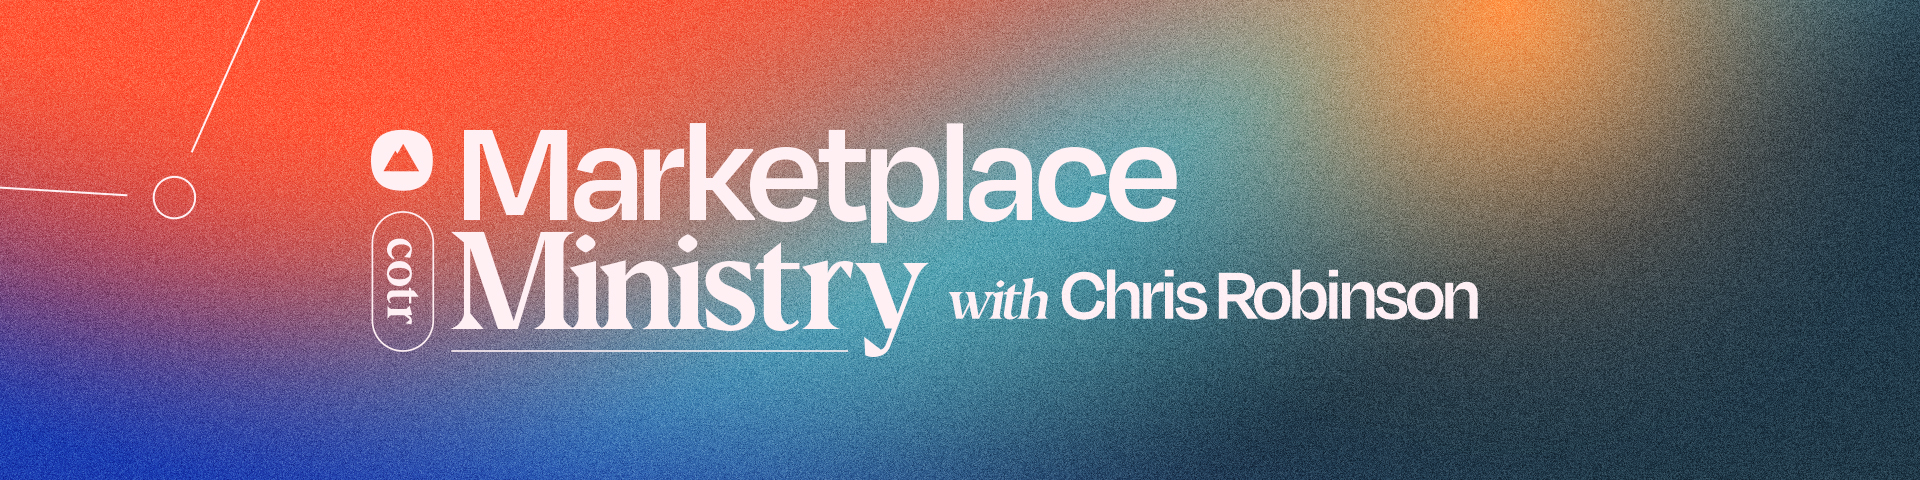 Marketplace_Ministry_August_Event_Banner.jpg